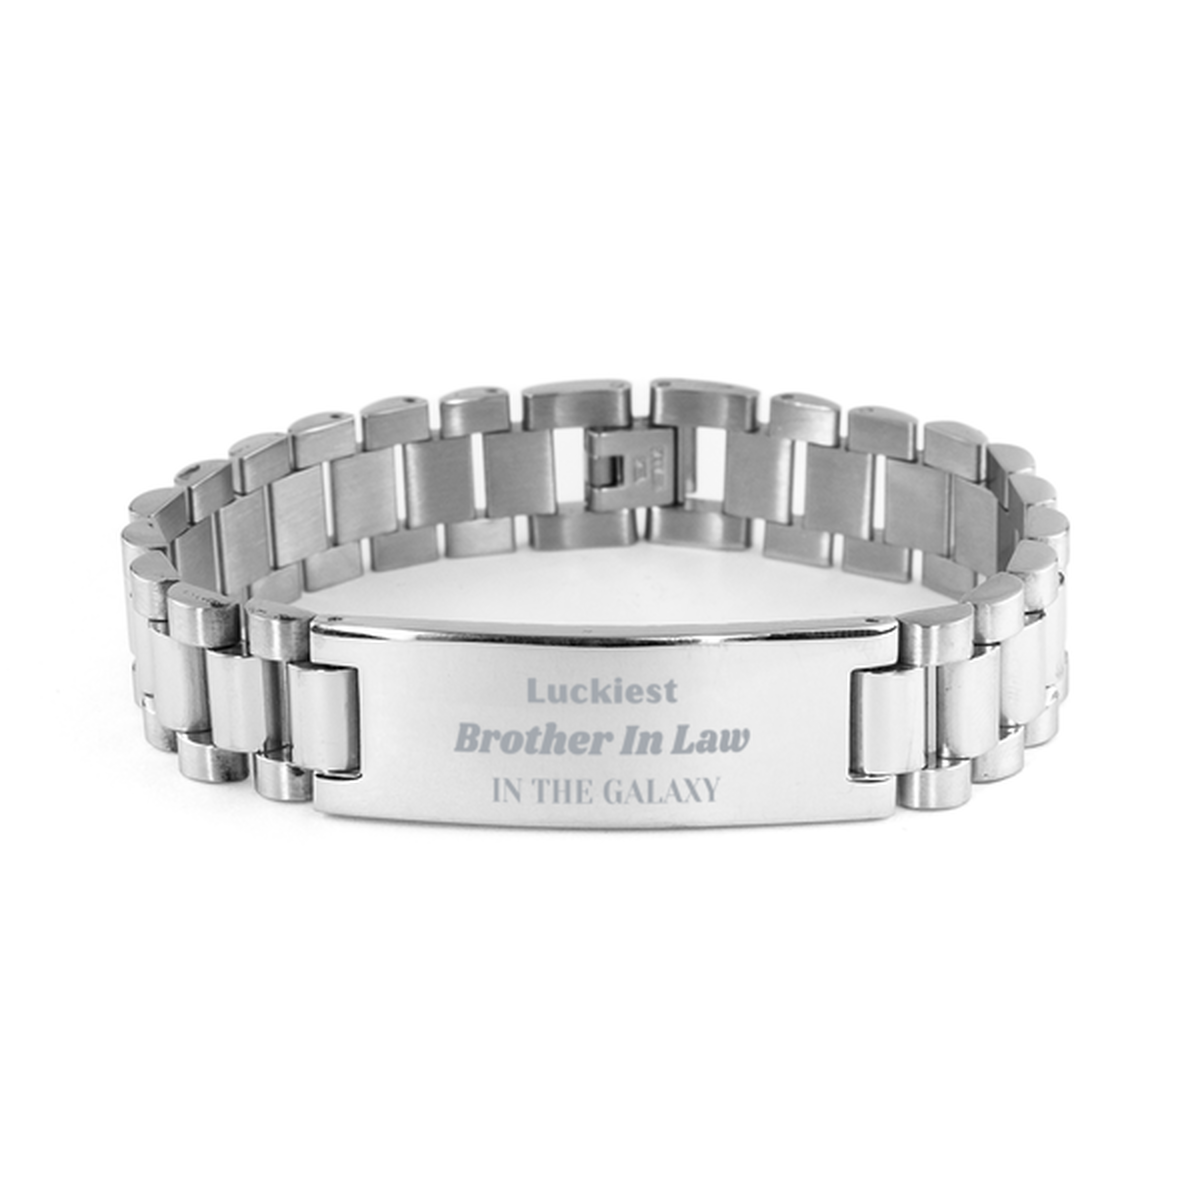 Luckiest Brother In Law in the Galaxy, To My Brother In Law Engraved Gifts, Christmas Brother In Law Ladder Stainless Steel Bracelet Gifts, X-mas Birthday Unique Gifts For Brother In Law Men Women